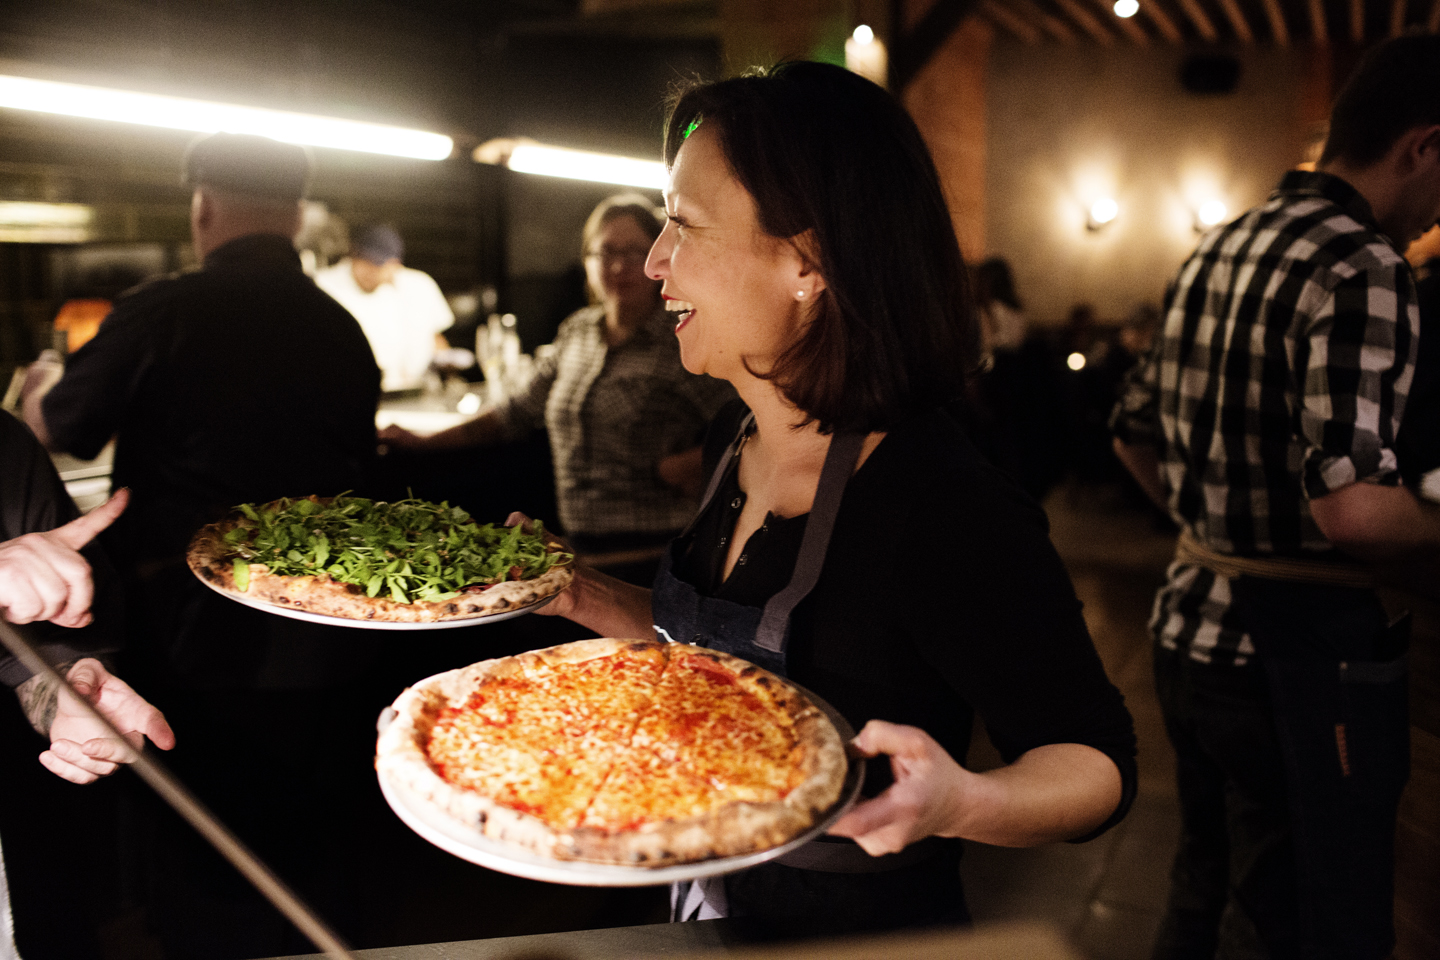 Chef/owner Ann Kim serving pizzas | Young Joni | The Restaurant Project